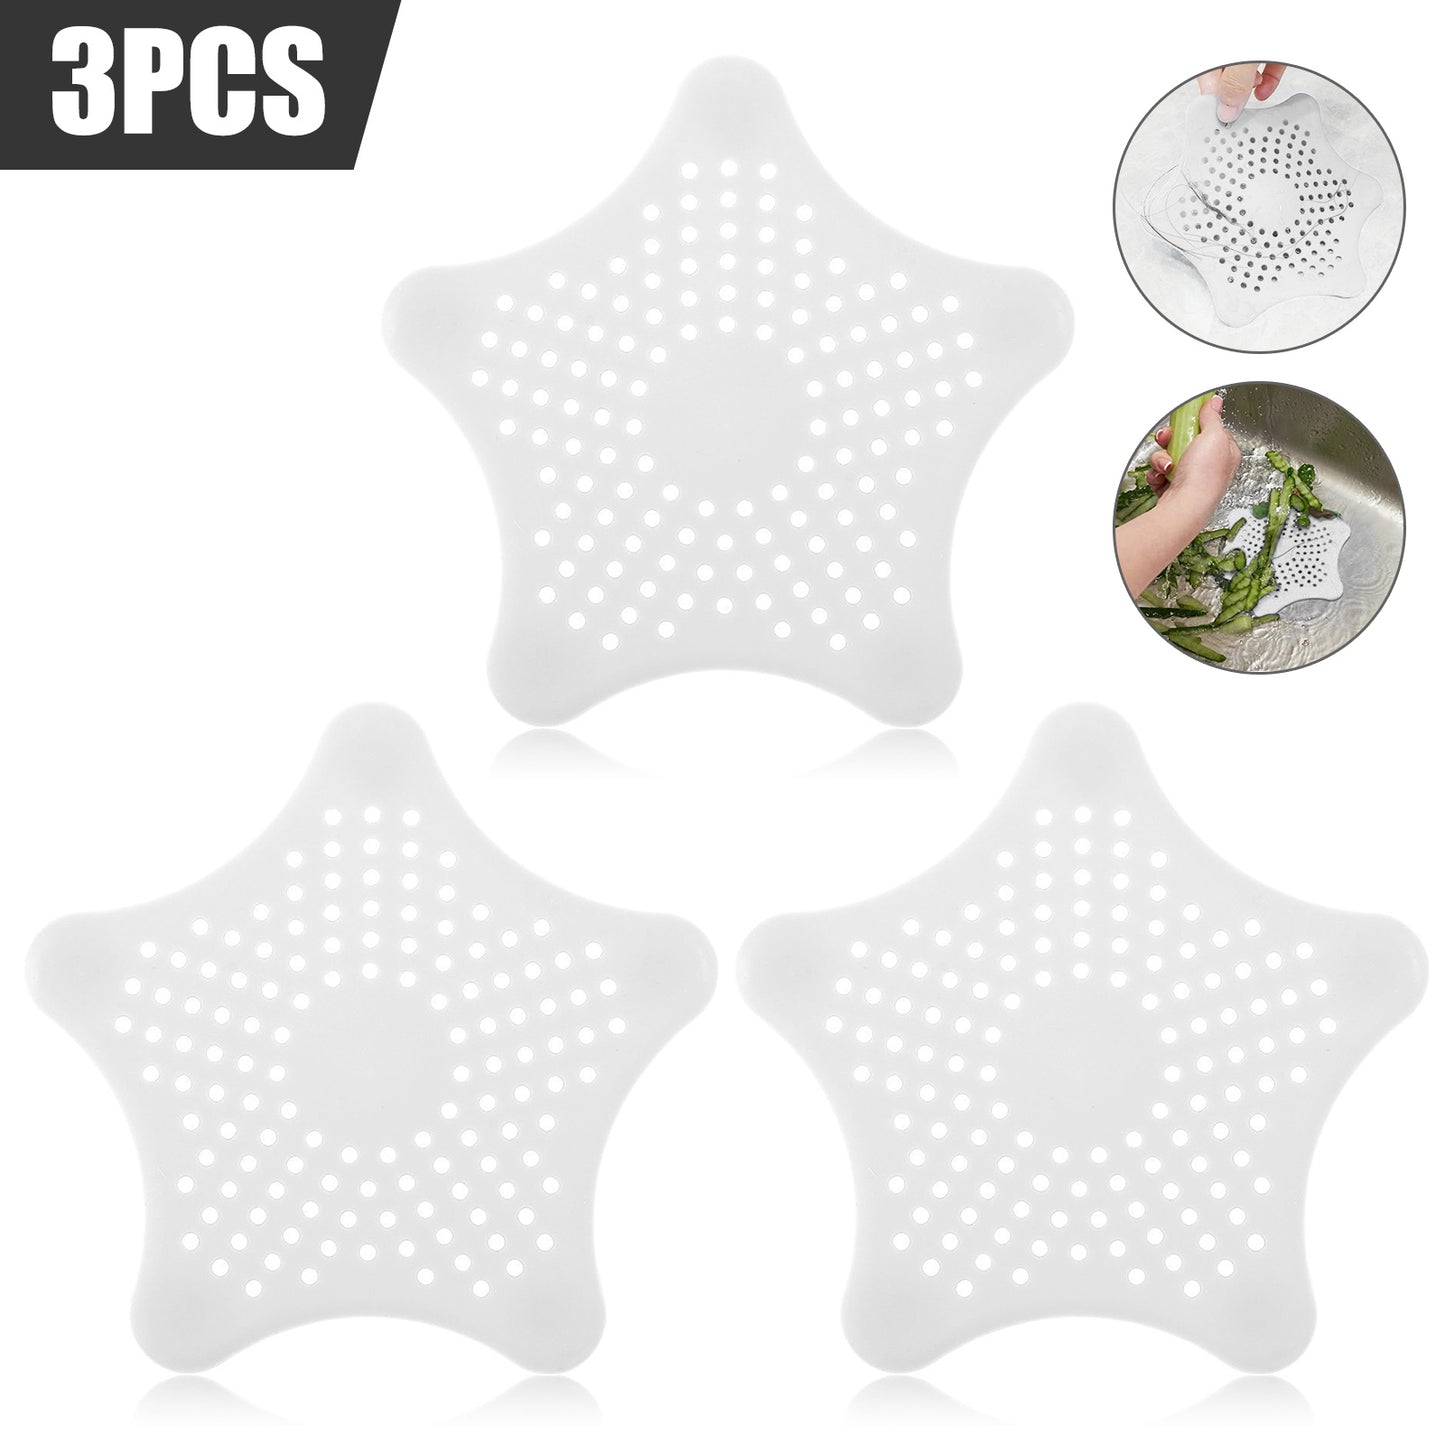 3PCS Silicone Starfish-shaped Sink Drain Filter Bathtub Hair Catcher Stopper Drain Hole Filter Strainer For Bathroom Kitchen Toilet